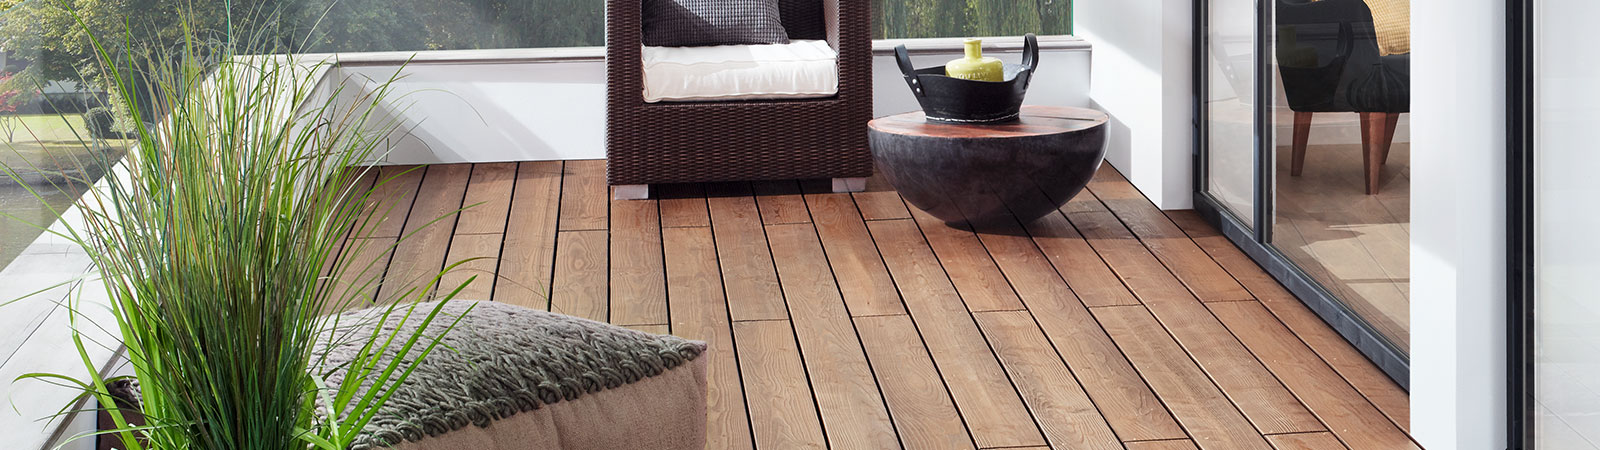 Decking and paving